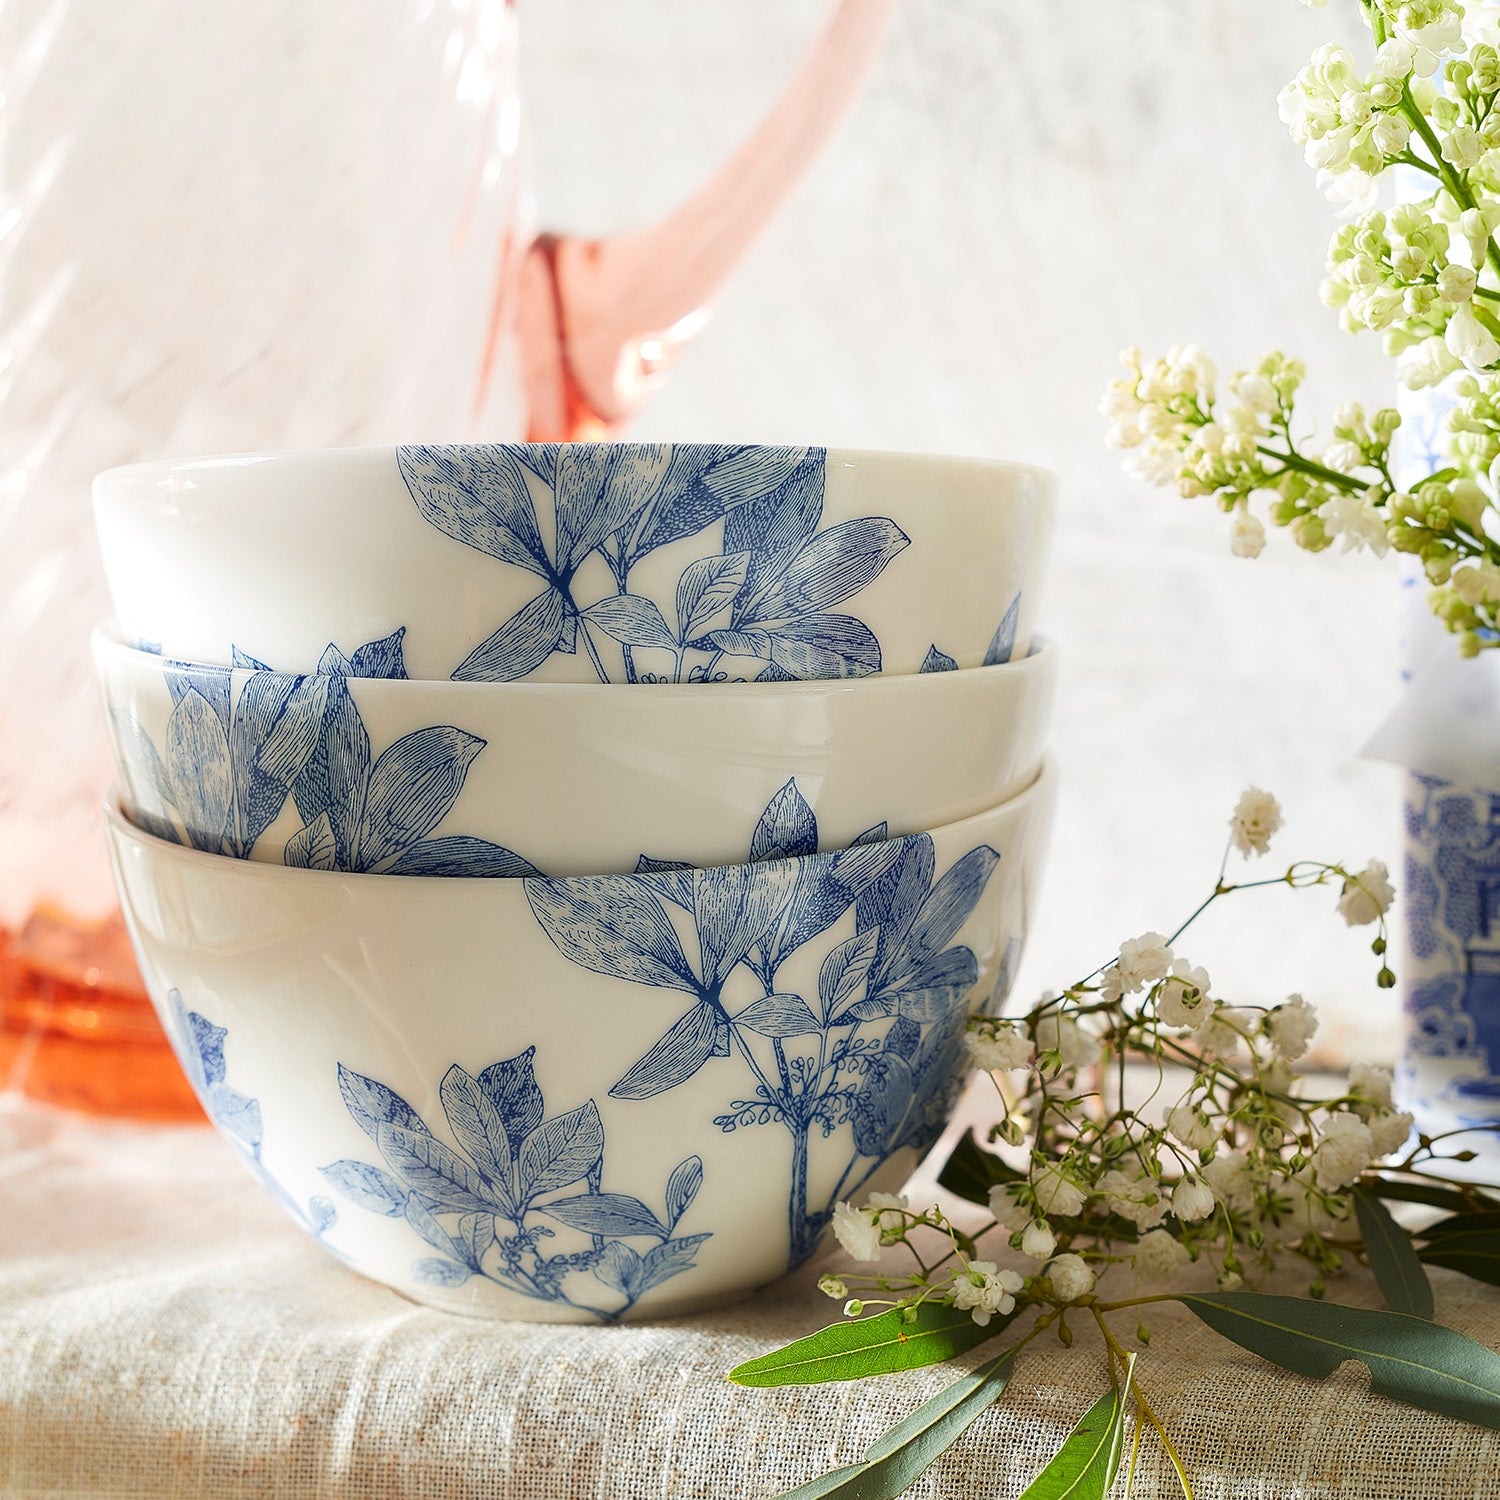 A white ceramic Arbor Cereal Bowl by Caskata with blue floral patterns features detailed leaves and branches, crafted from premium porcelain.